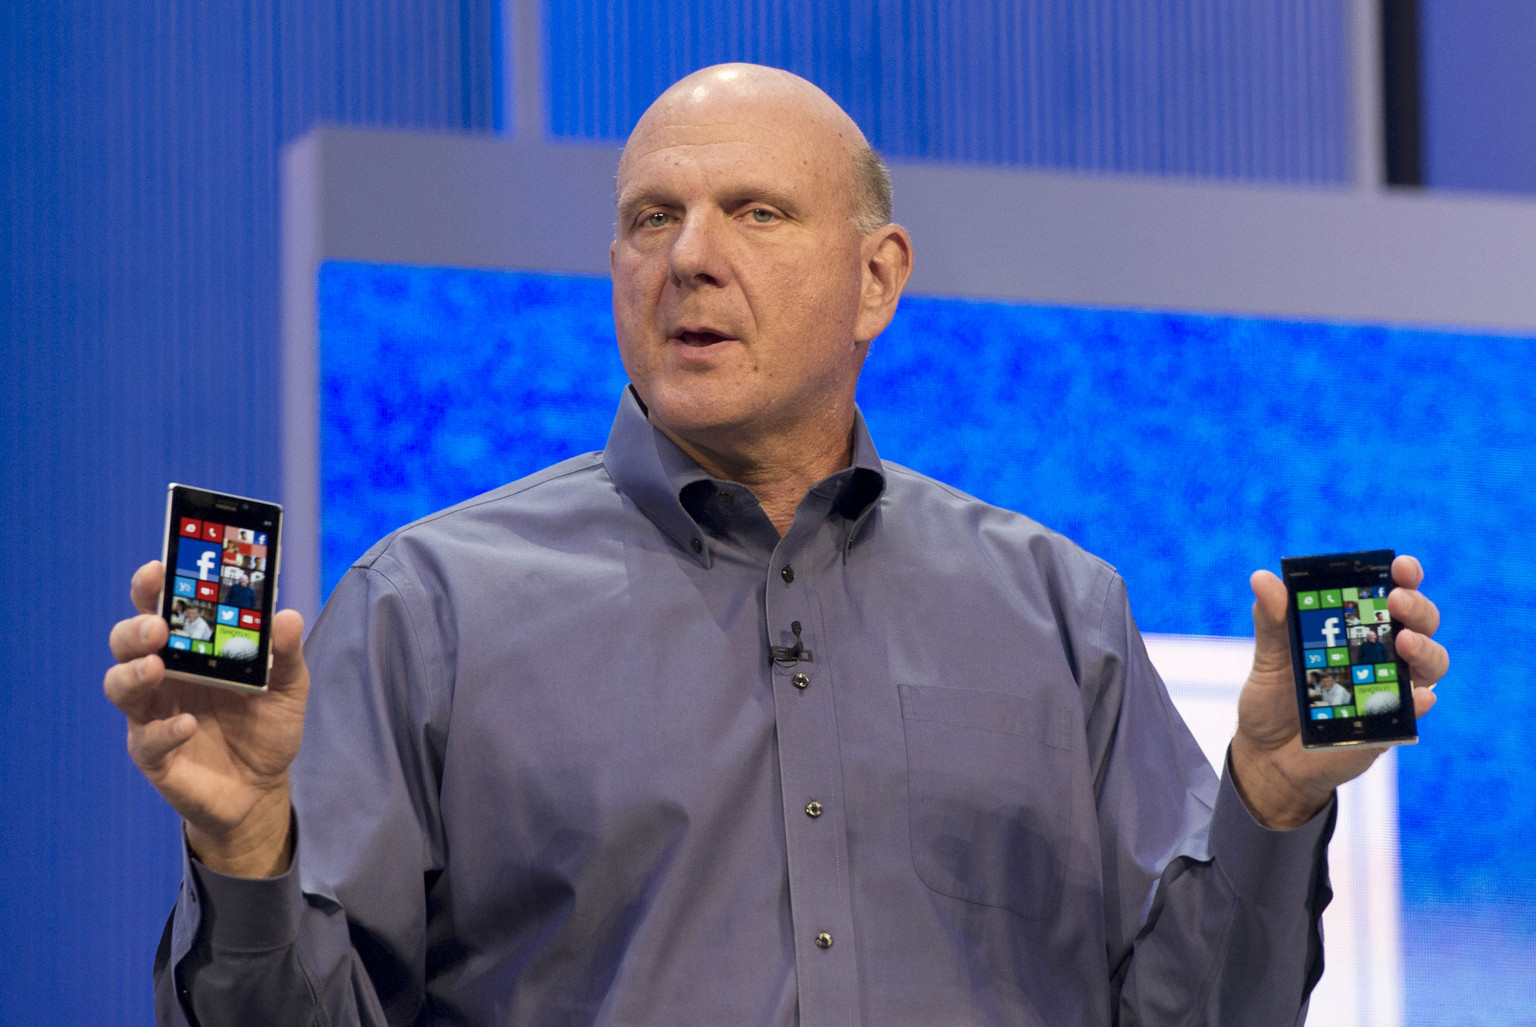 Steve Ballmer, chief executive officer of Microsoft Corp., holds up Nokia OYJ smart phones while delivering the keynote during the Microsoft Build Developers Conference in San Francisco, California, U.S., on Wednesday, June 26, 2013. Facebook Inc. is building an application for Microsoft Corp.'s Windows 8, adding one of the most popular programs still missing from the operating system designed to help Microsoft gain tablet customers. Photographer: David Paul Morris/Bloomberg via Getty Images